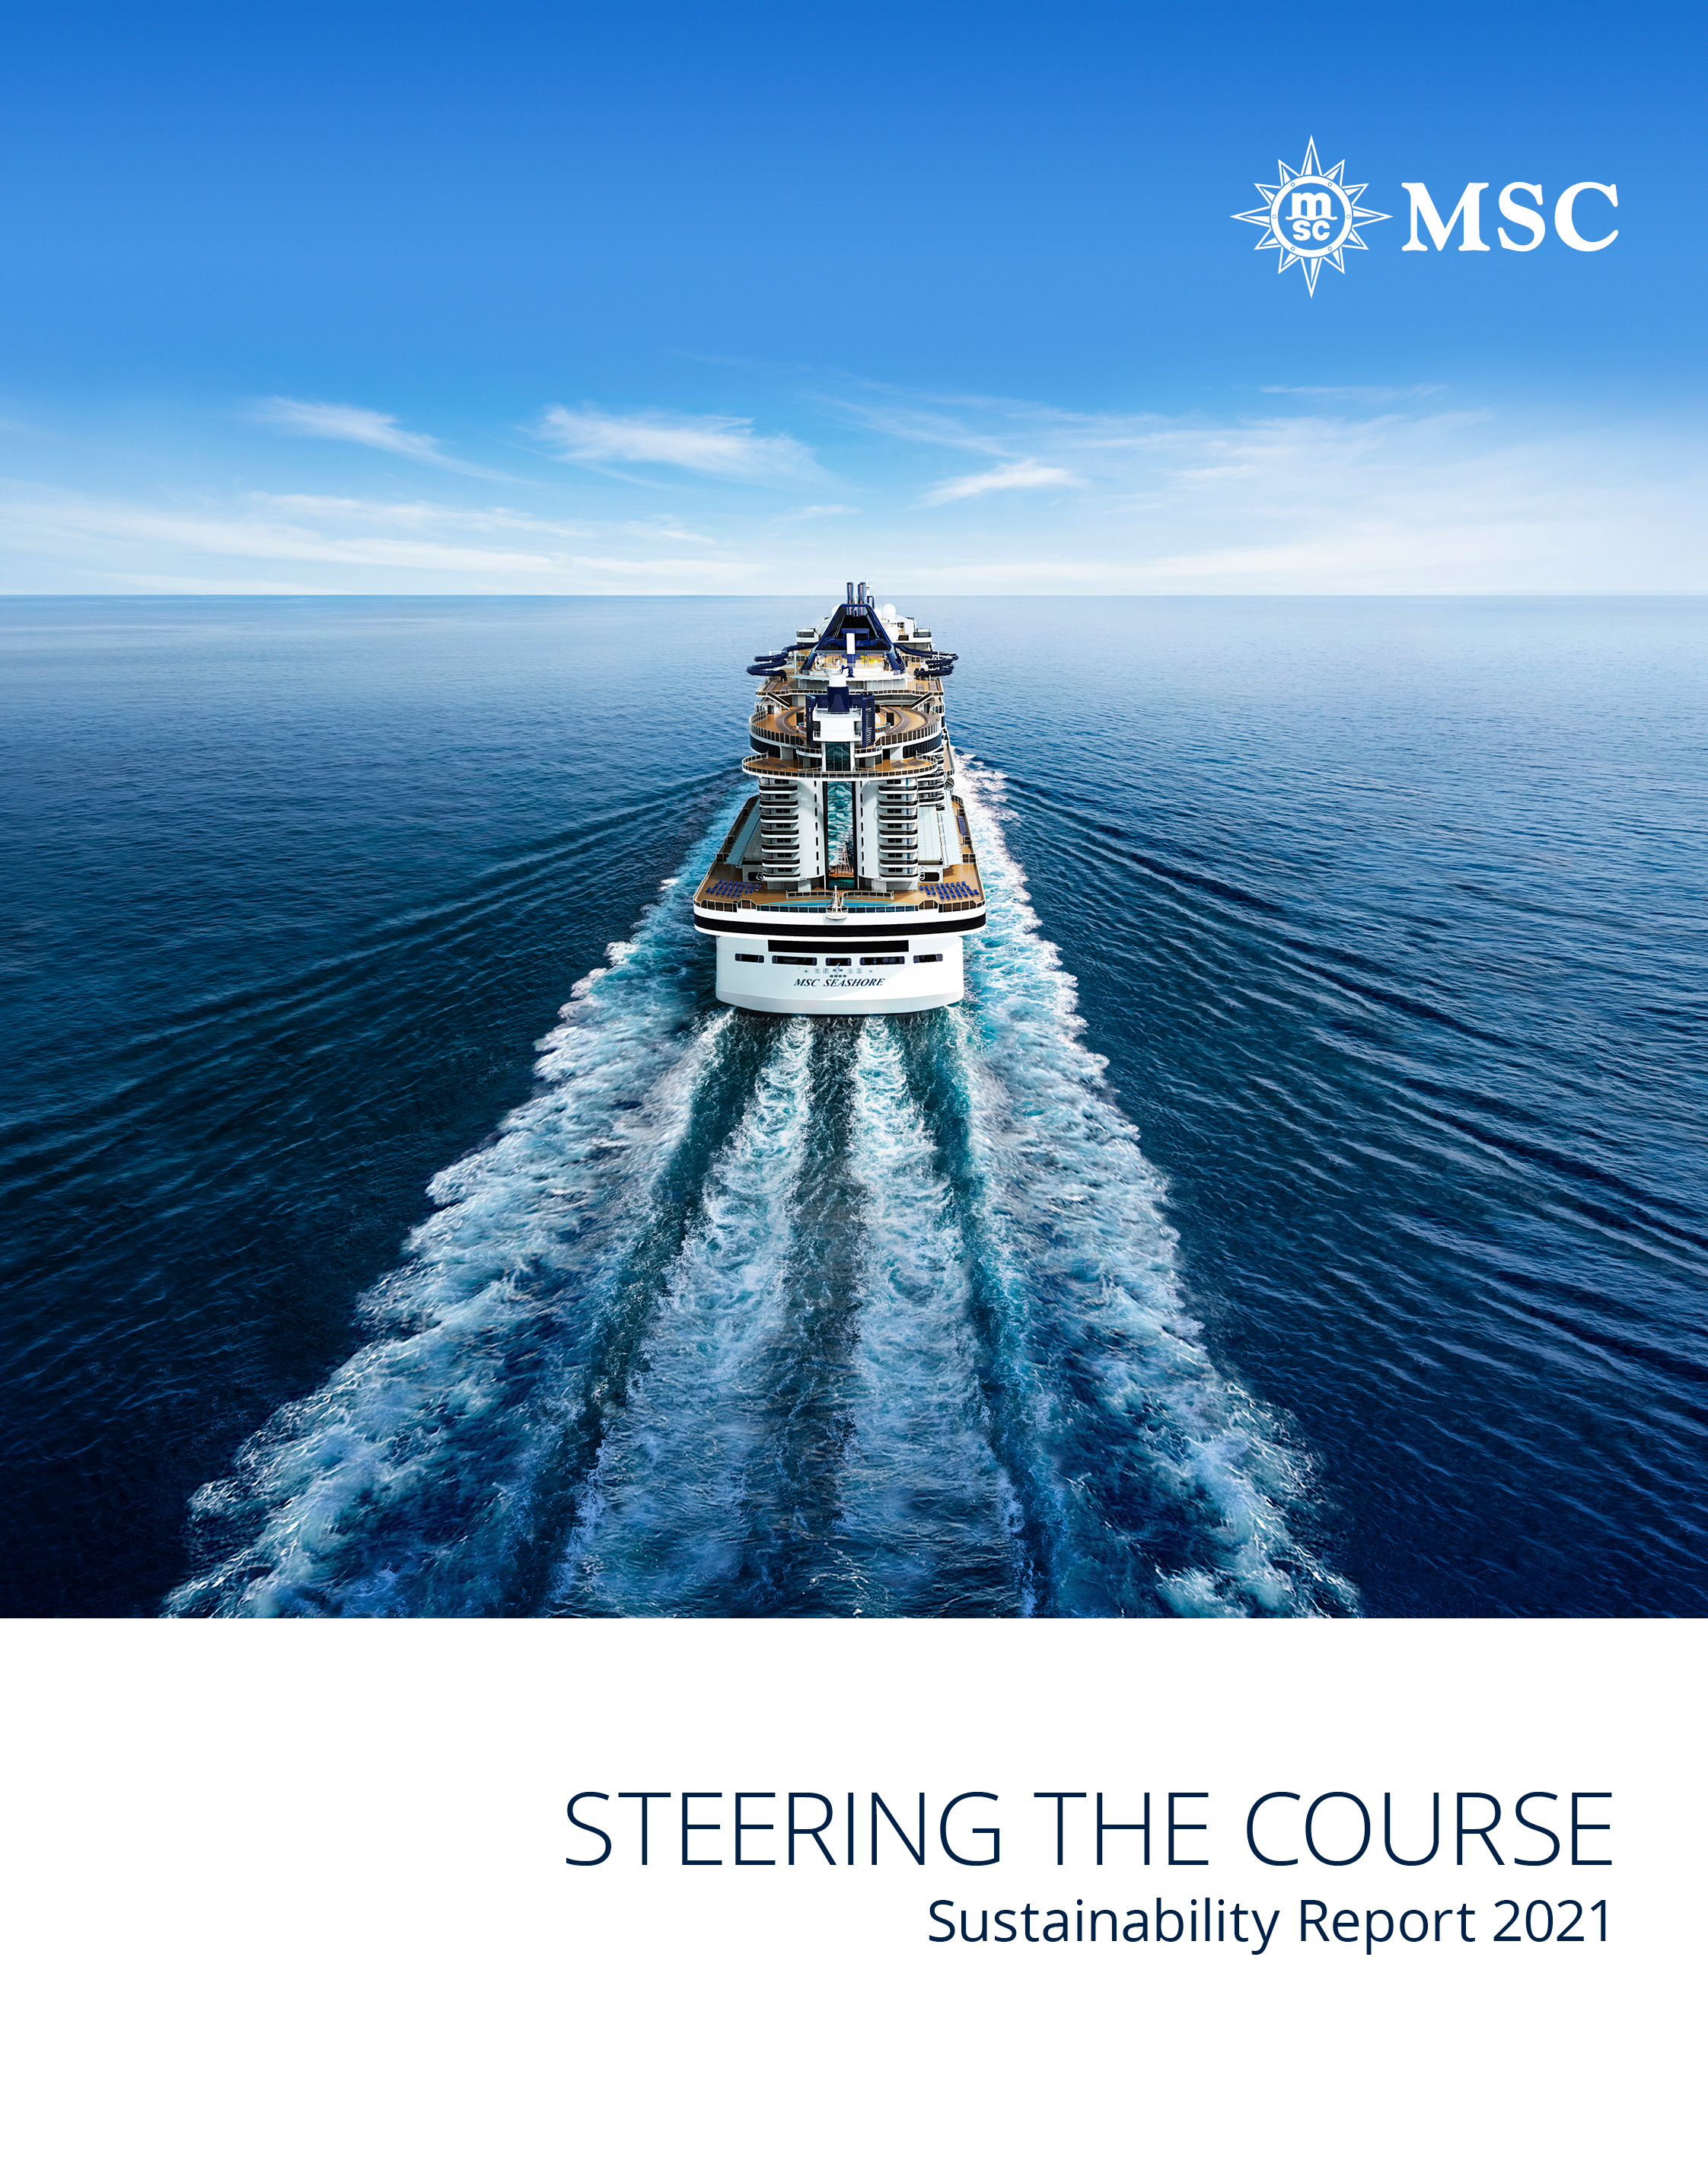 On World Oceans Day, MSC Cruises publishes its 2021 Sustainability Report (Image - June 2022)